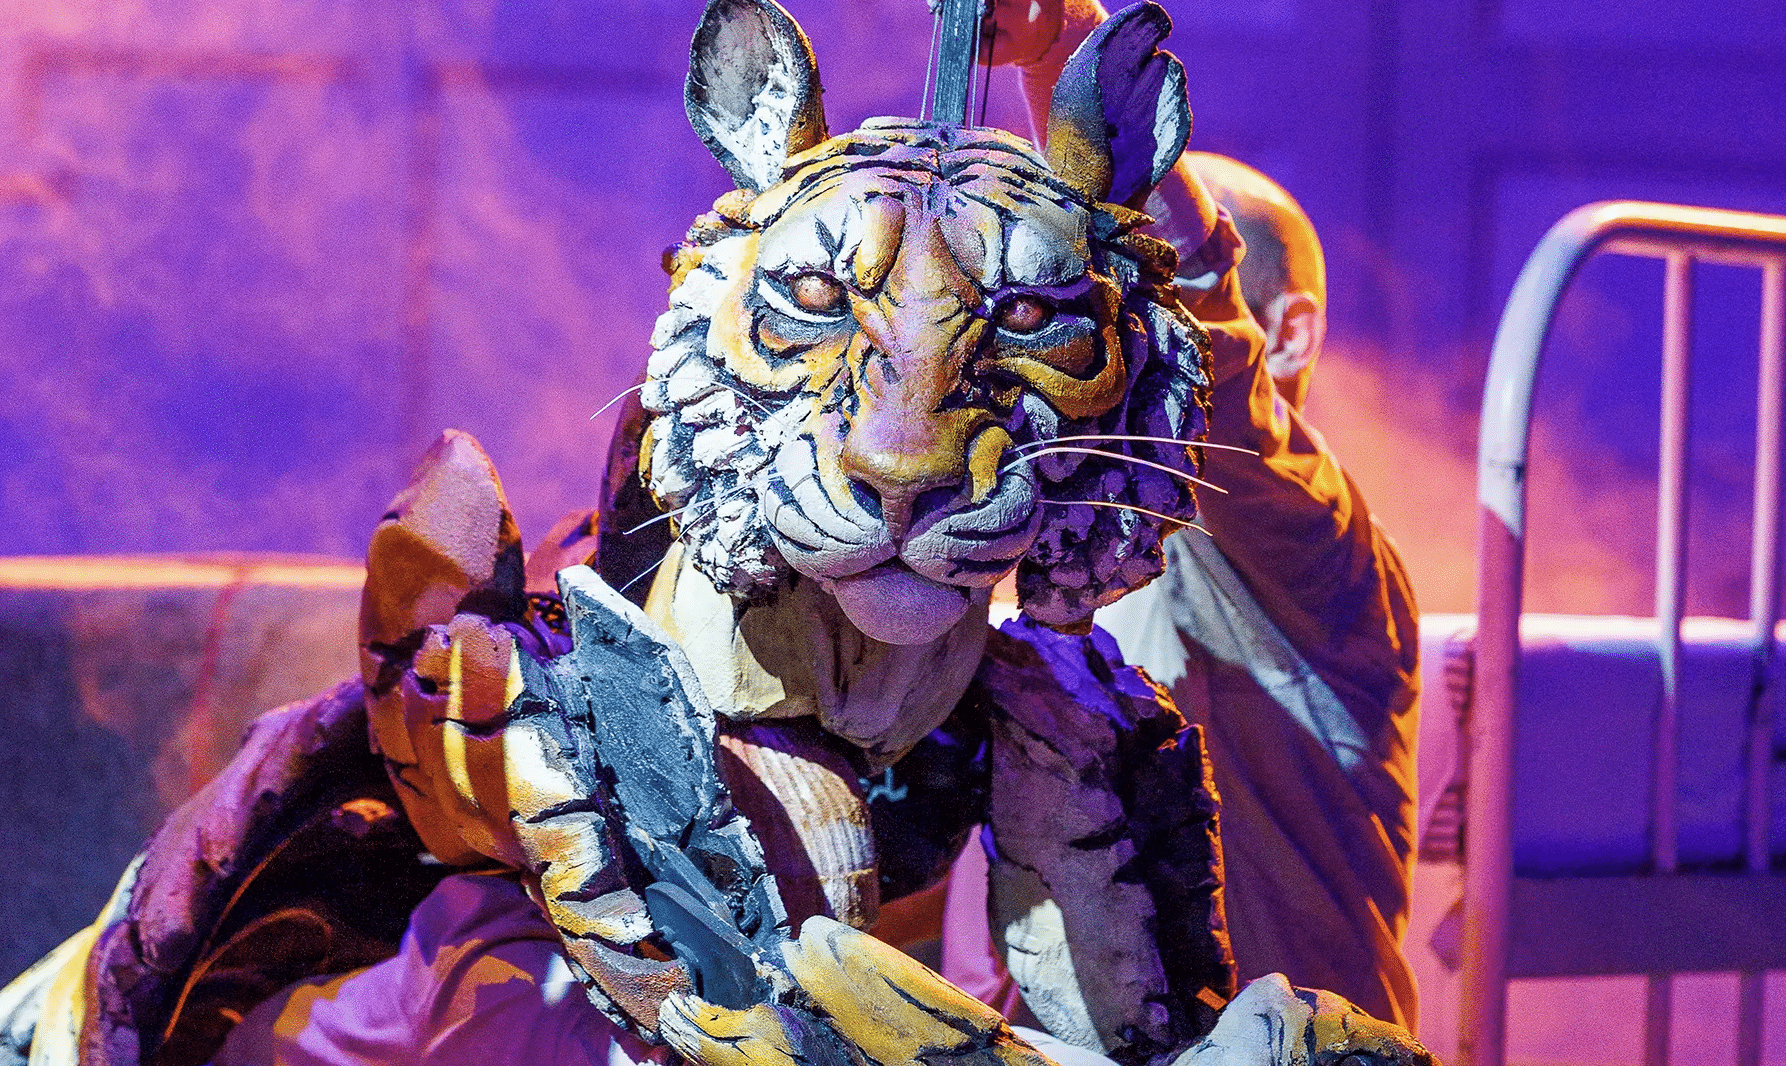 How the Life of Pi Puppeteers Bring a Zoo to Life on Broadway